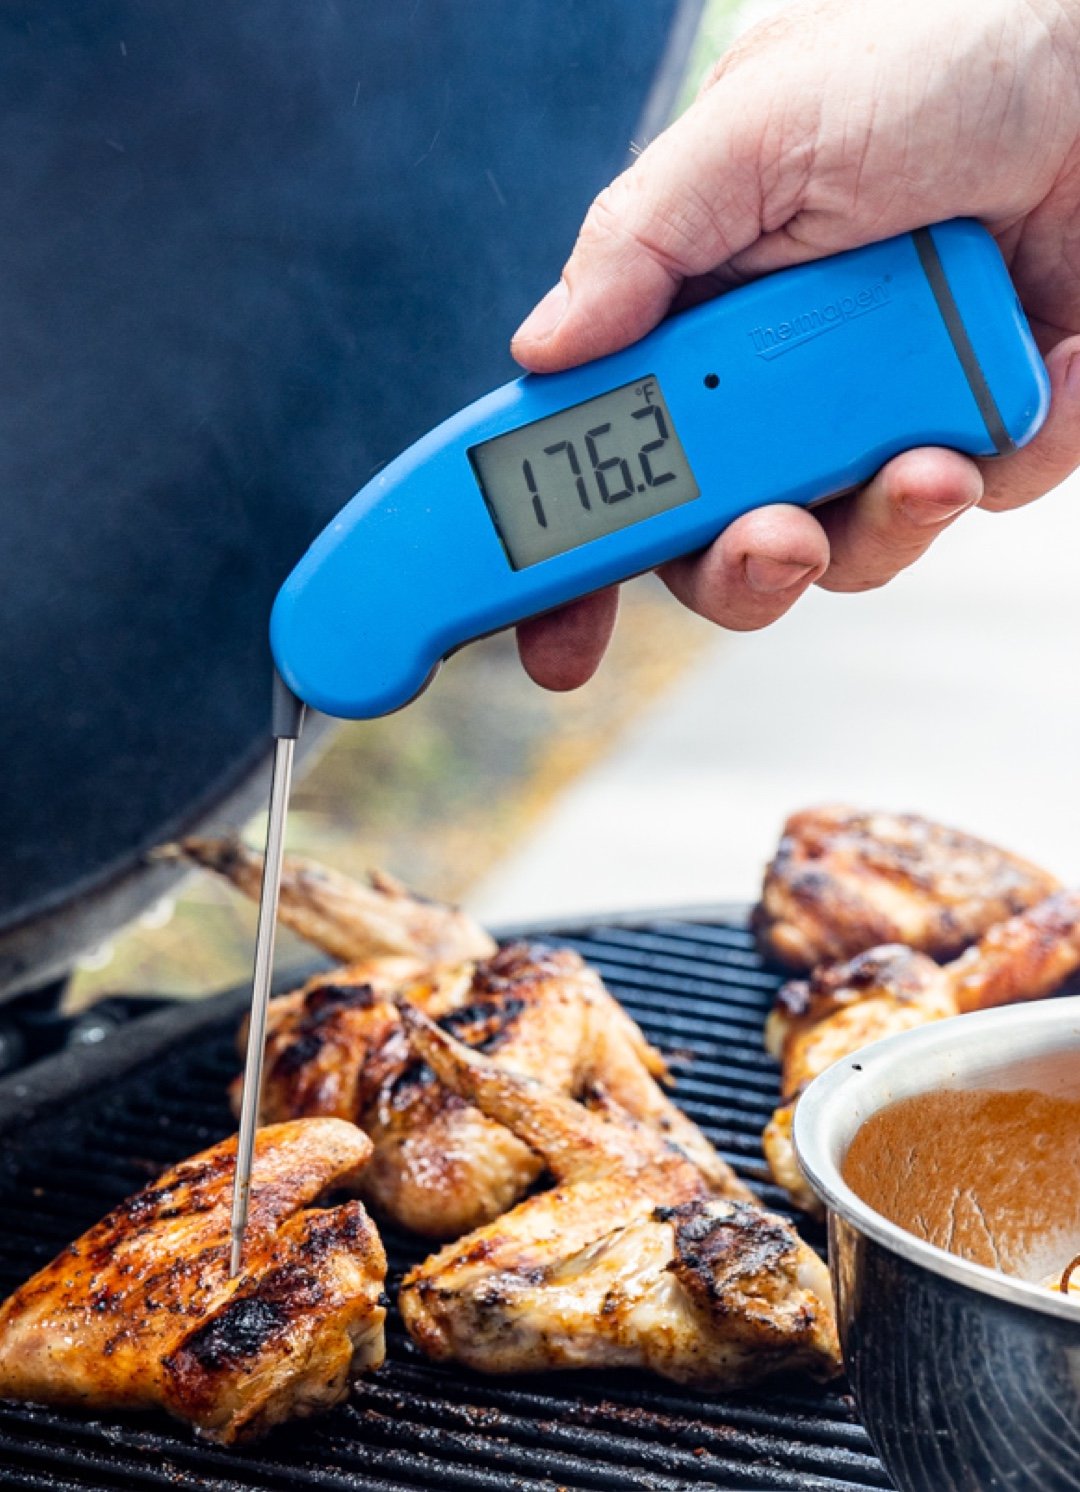 ThermoWorks: New Limited Turquoise DOT Alarm Thermometer